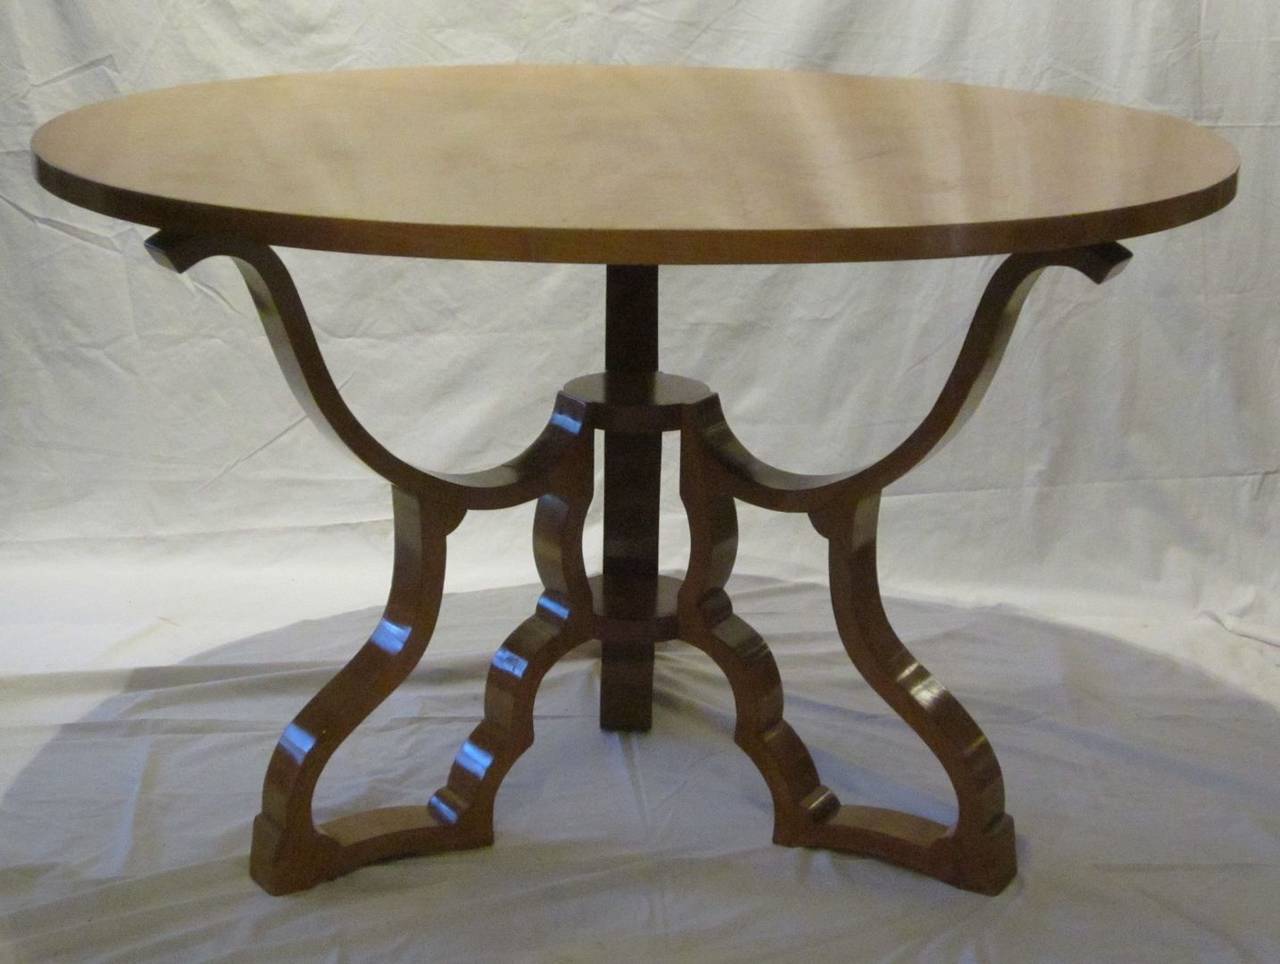 Polished maple dining table with cut-out decorative legs from Italy, 1940s.
The table can be used as either a dining table or centre hall table.
It is in excellent condition. Decorative lattice cut-out base details.